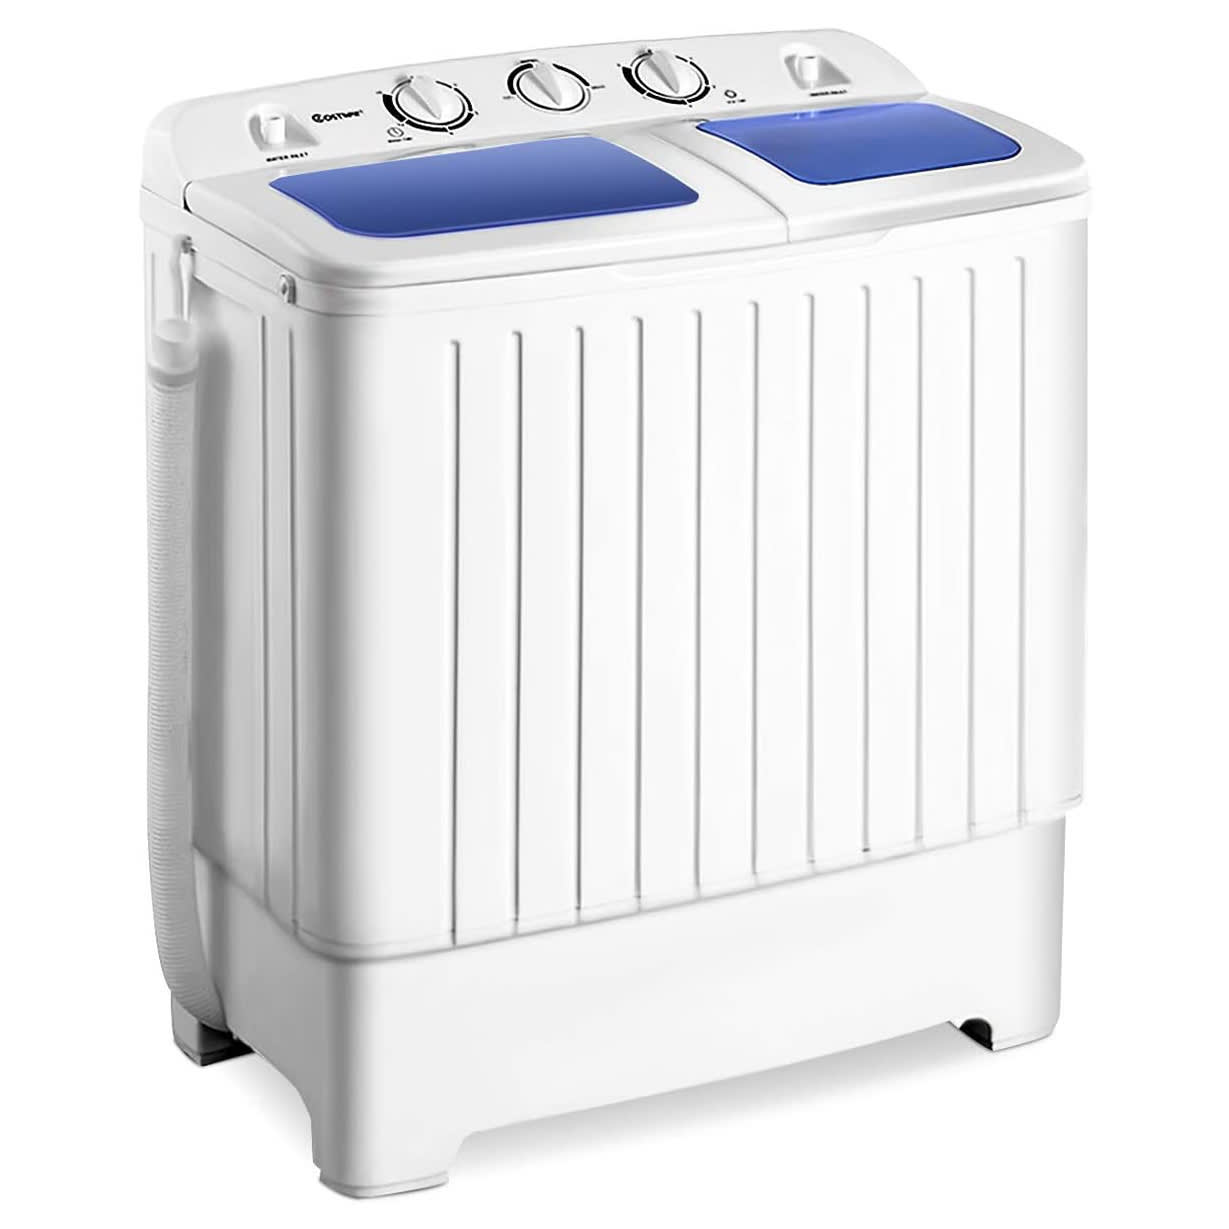 A Mini Portable Washing Machine With Suction Cup Design